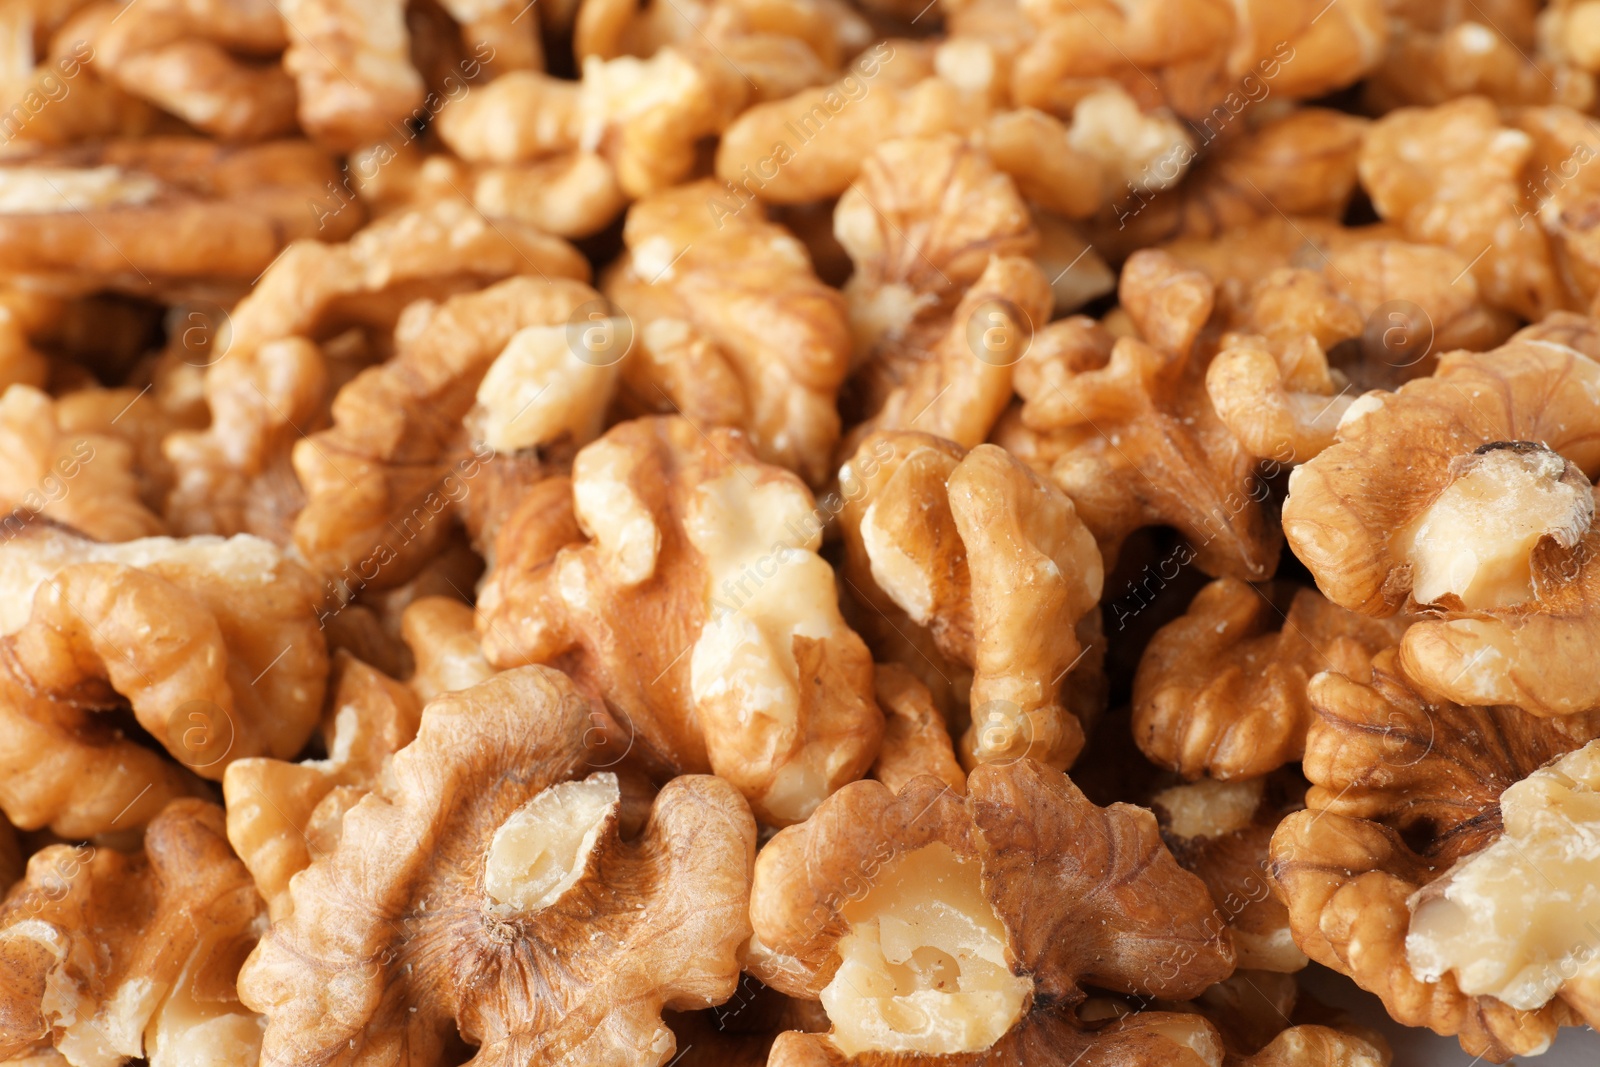 Photo of Pile of shelled walnuts as background, closeup